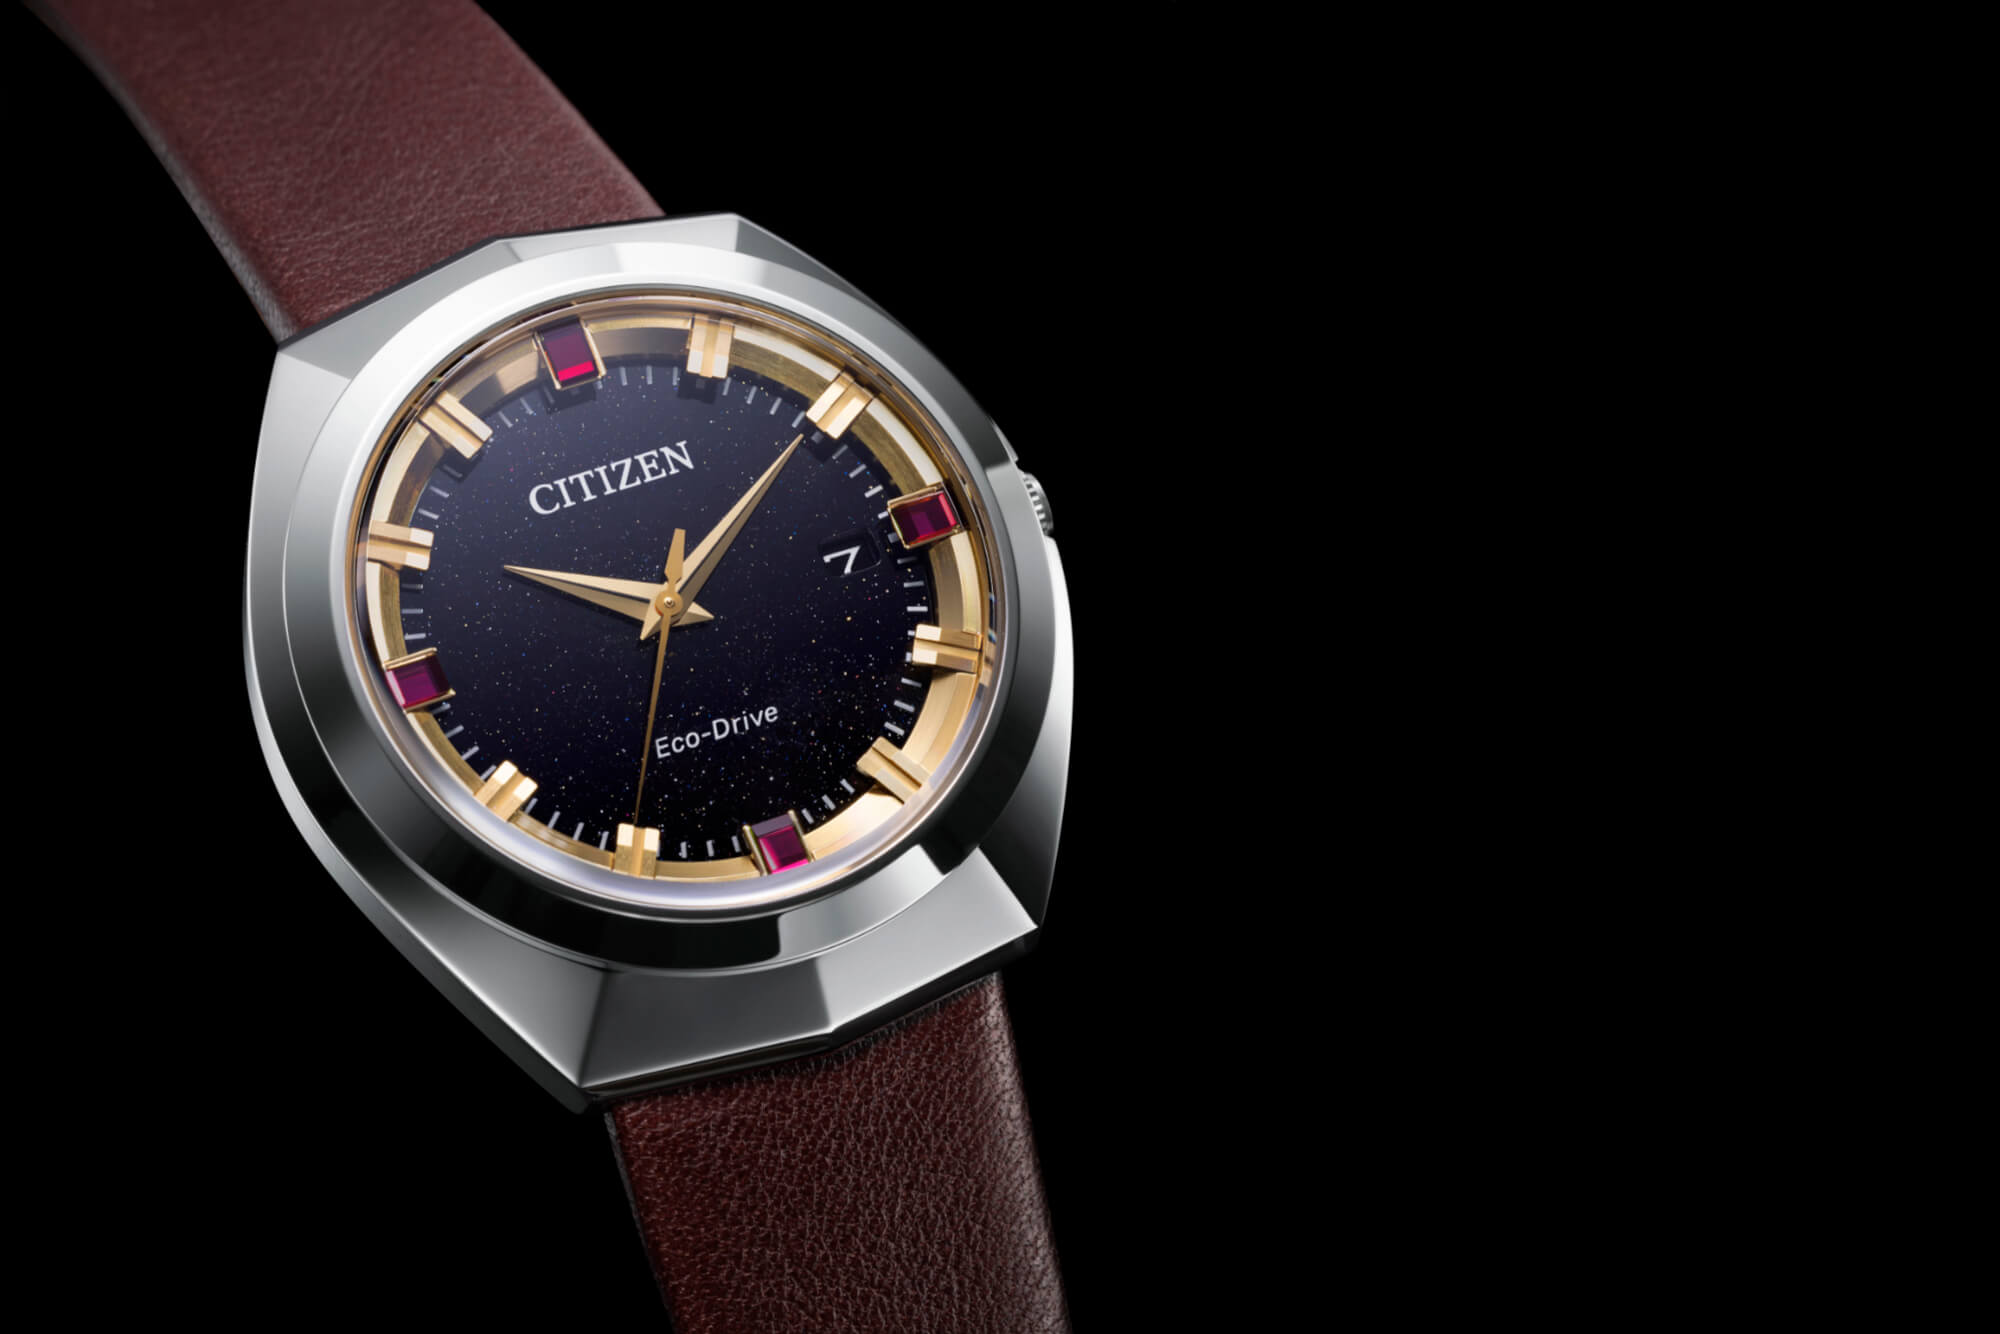 Citizen Releases The Eco-Drive 365 Collection With An All-New